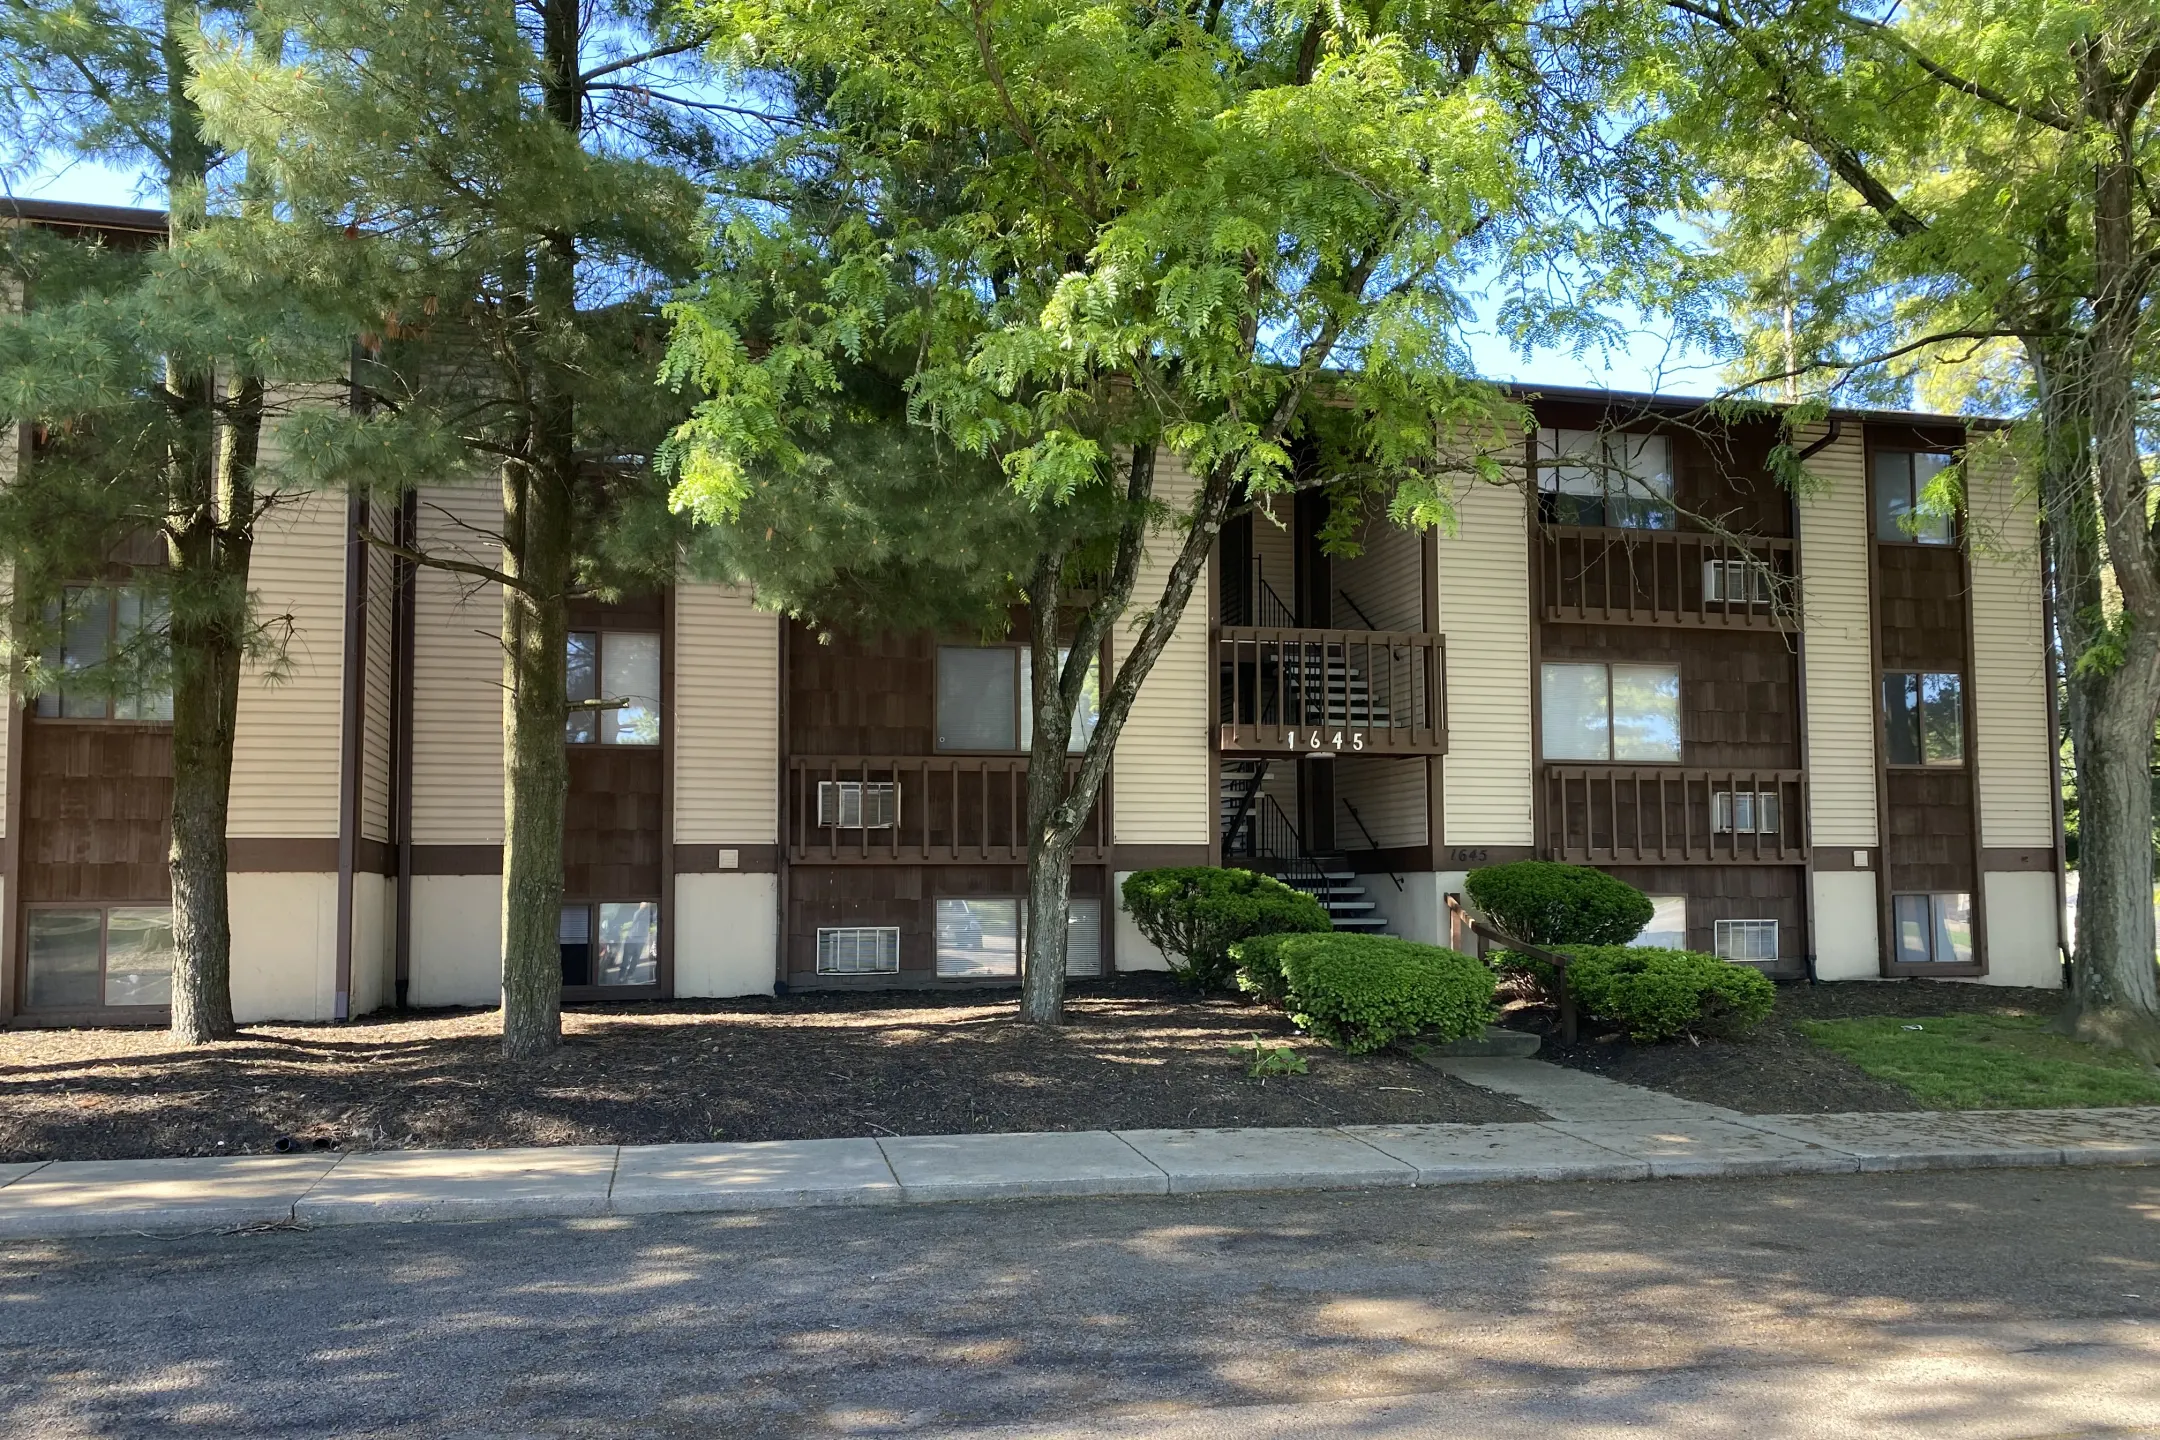 Building - Eagle Crest Apartments - Middletown, OH